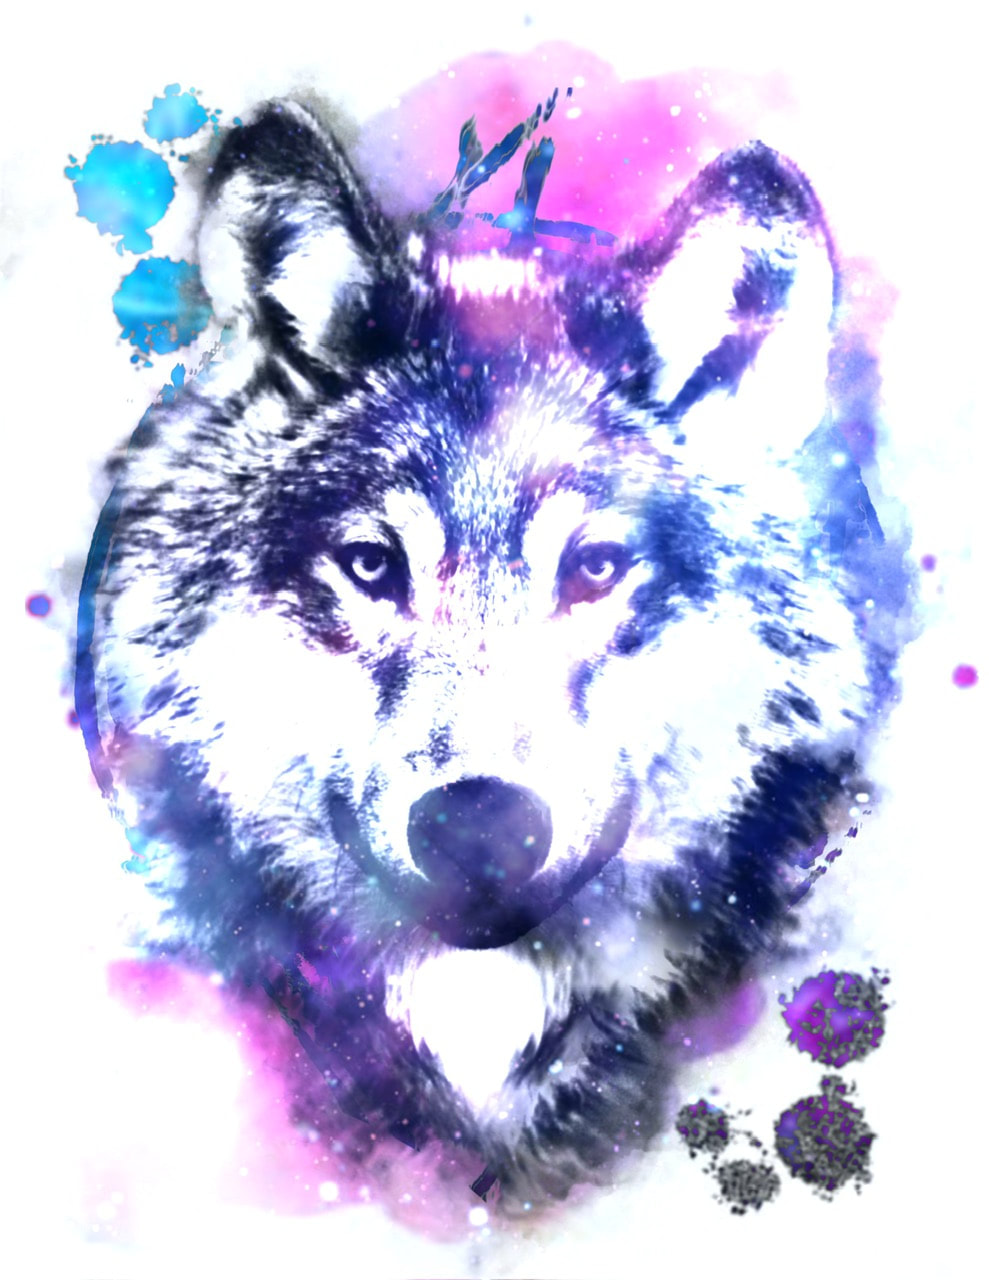 Pink, purple, and blue galaxy wolf. Realism tattoo design for sale.